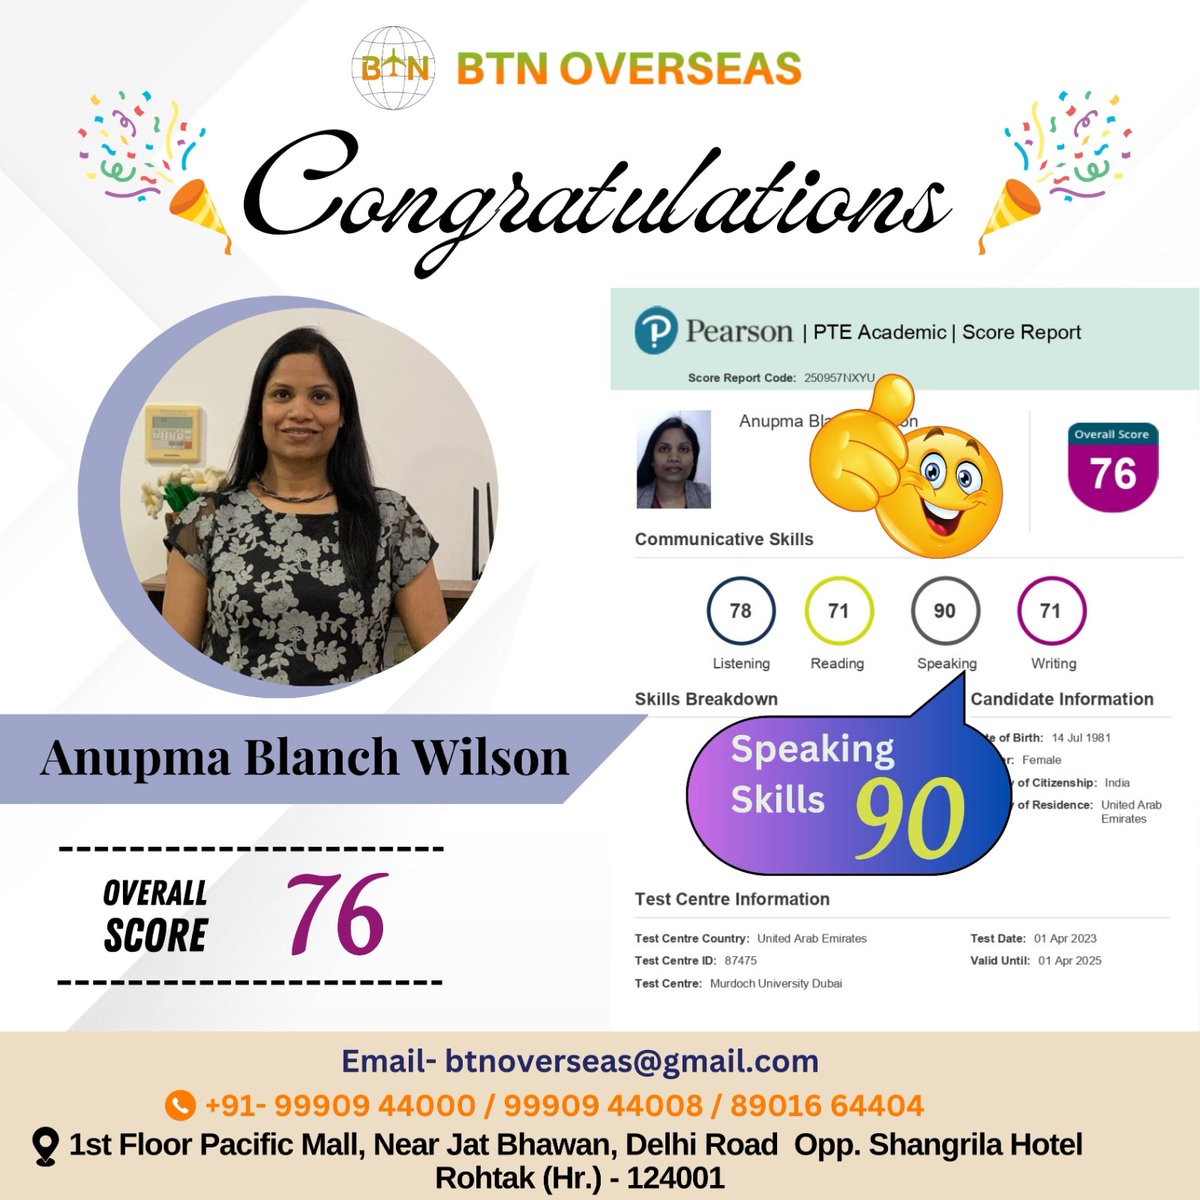 Congratulations, Anupma! Your hard work has paid off and you've cleared the PTE exam with flying colors. Wishing you all the success in your future endeavors!

You can also clear your Exam
Let's connect with us
For more detail contact on
9990944000
9990944008

#PTE
#pte
#pteexam